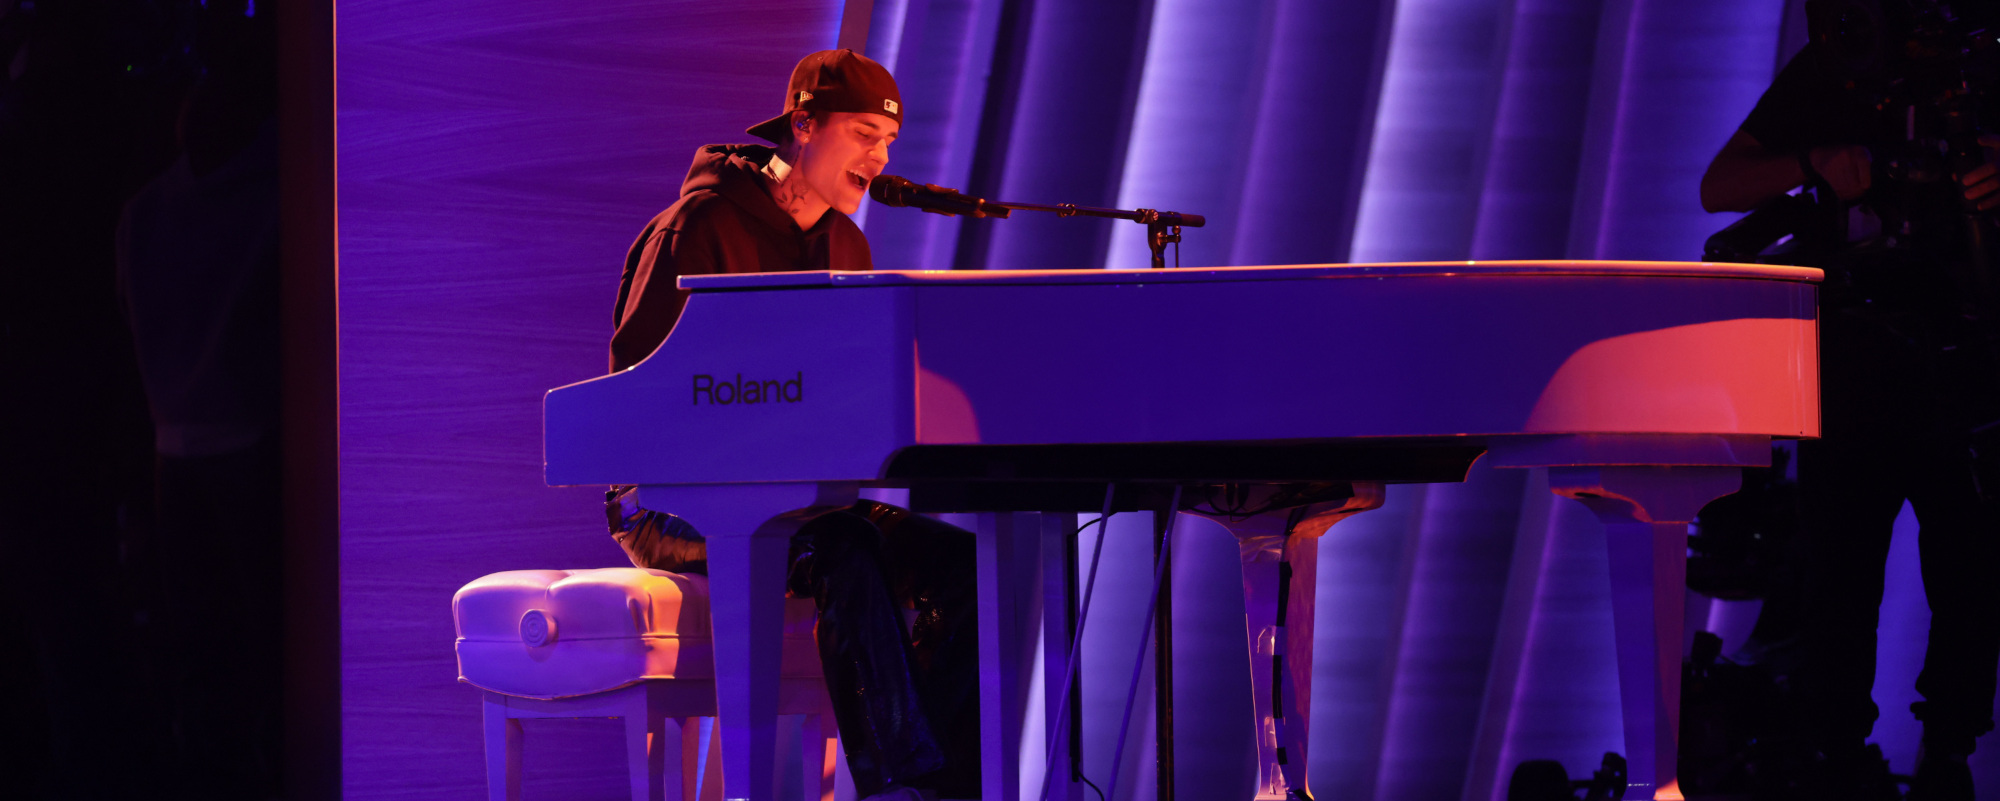 Justin Bieber Shut Out at Grammys, Performs Piano Rendition of “Peaches”